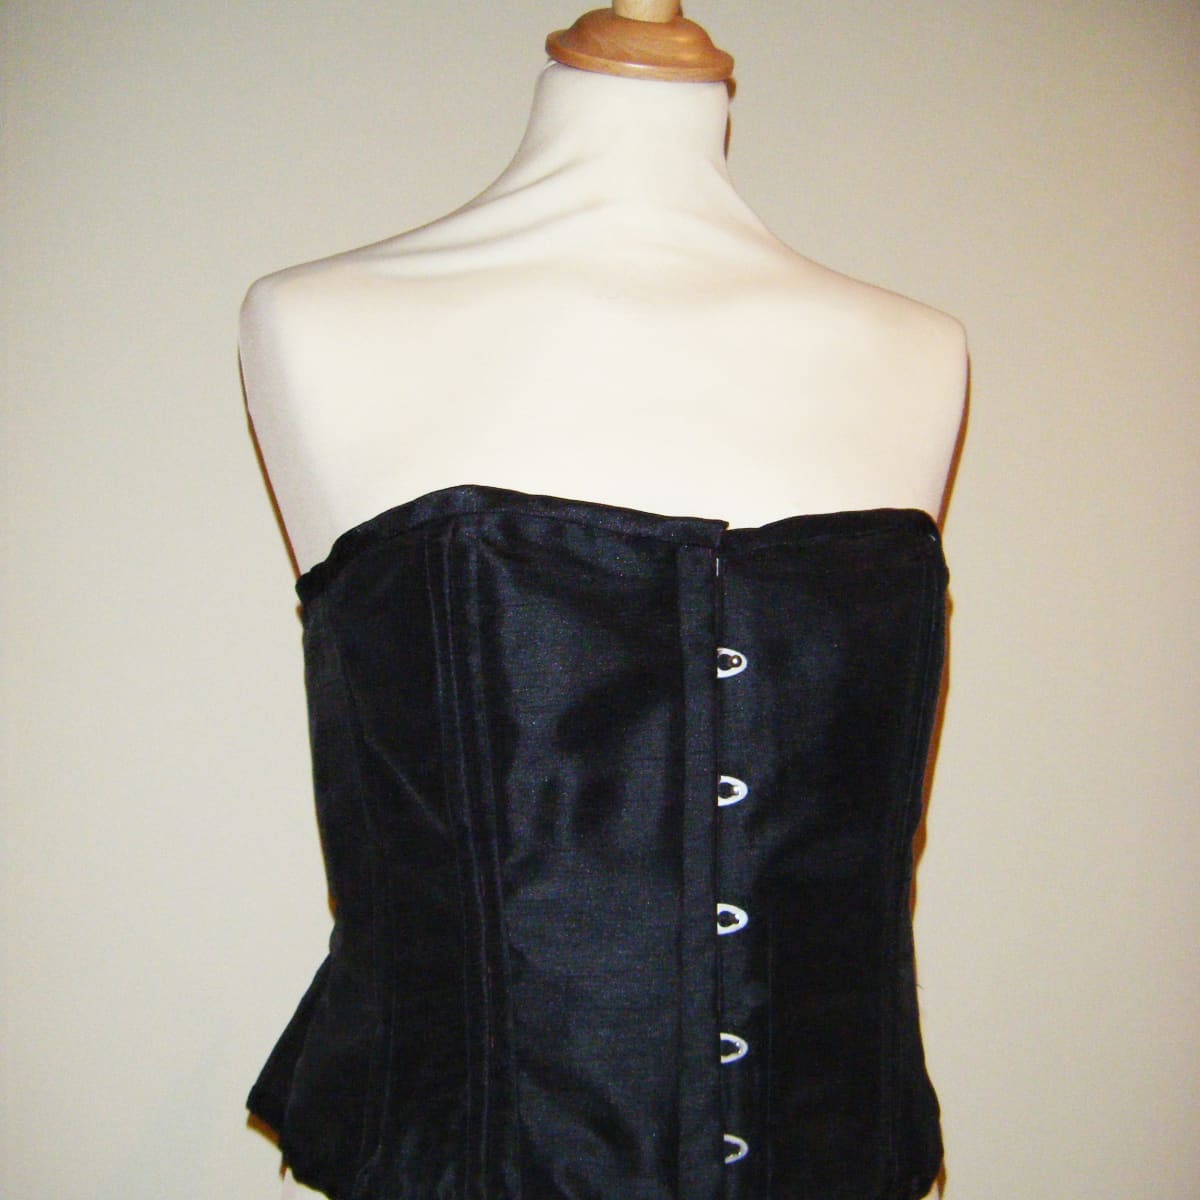 How to make CORSET LOOPS for corsets (PROFESSIONAL METHOD) 